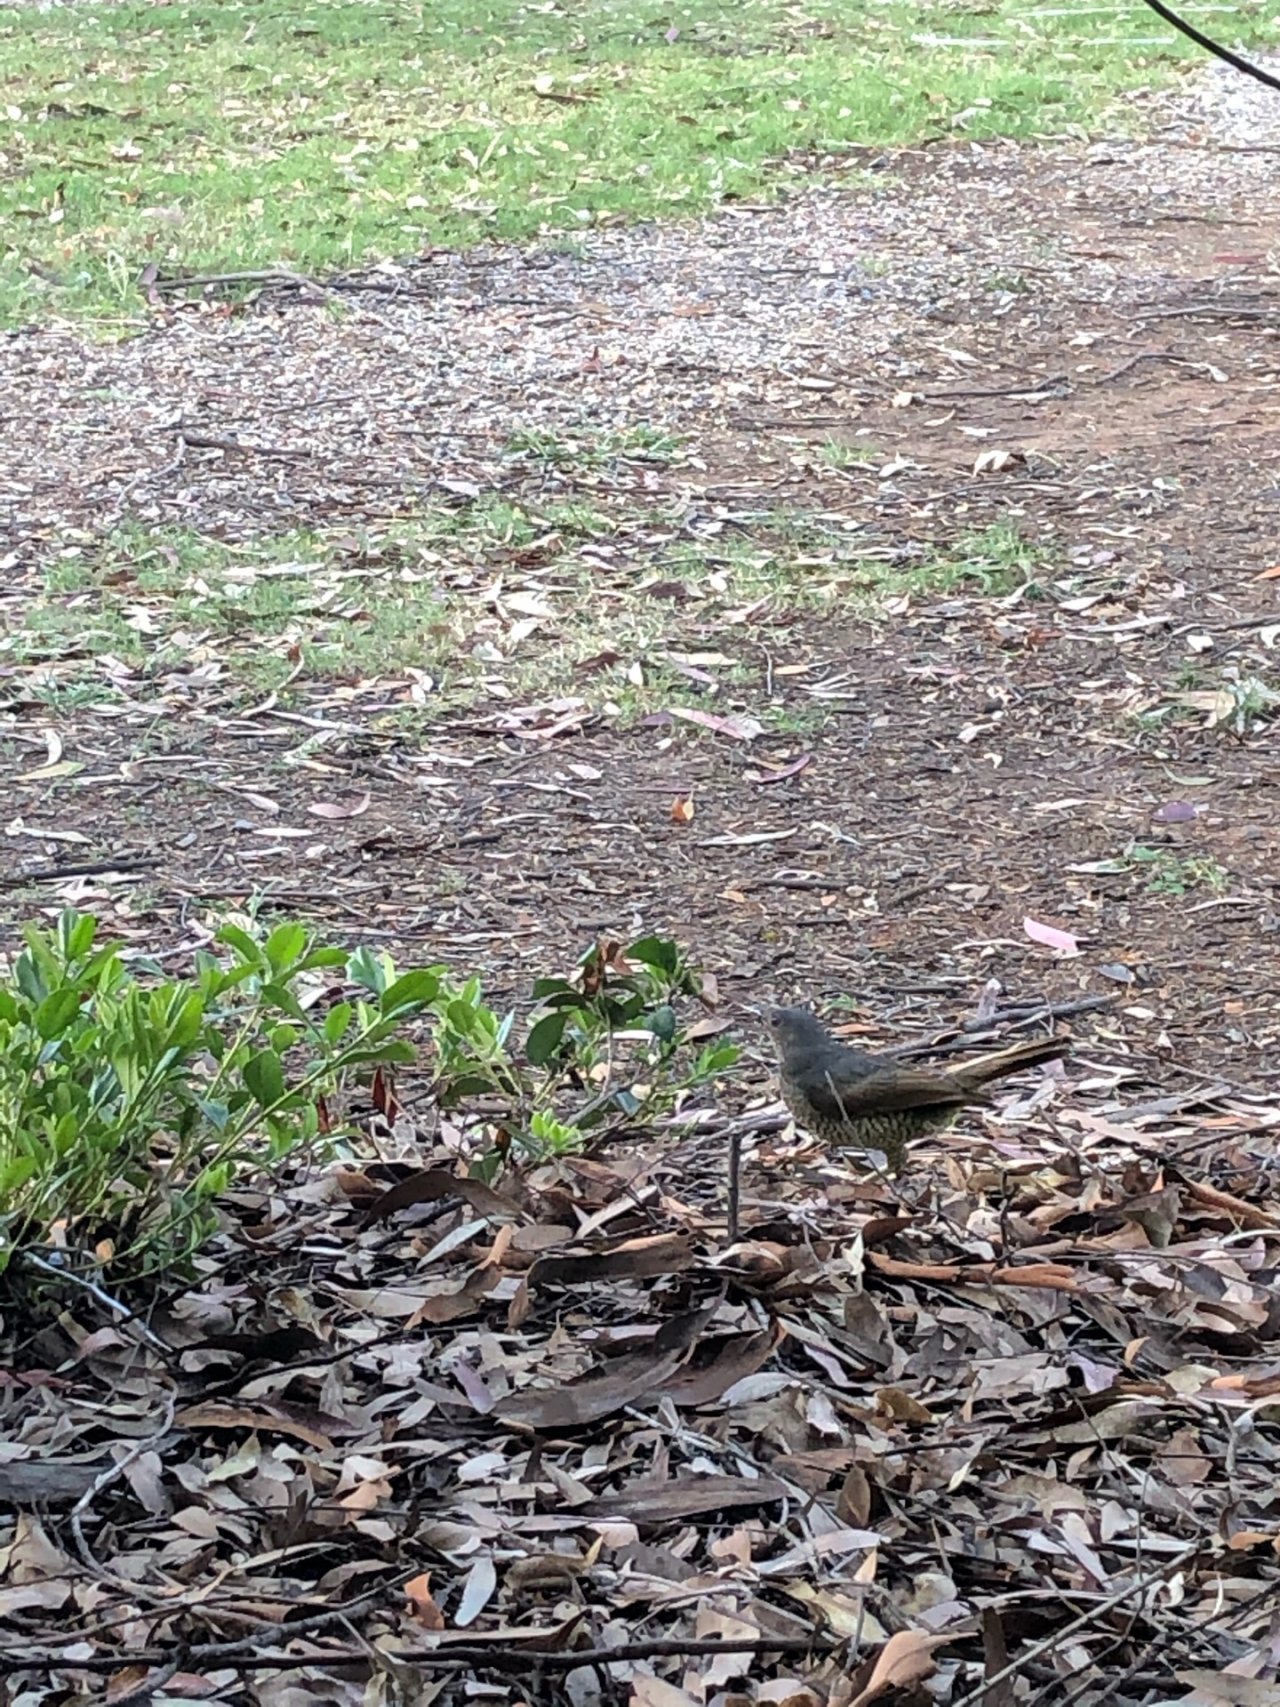 Other bird in Big City Birds App spotted by Dianne Whyte on 13.12.2020